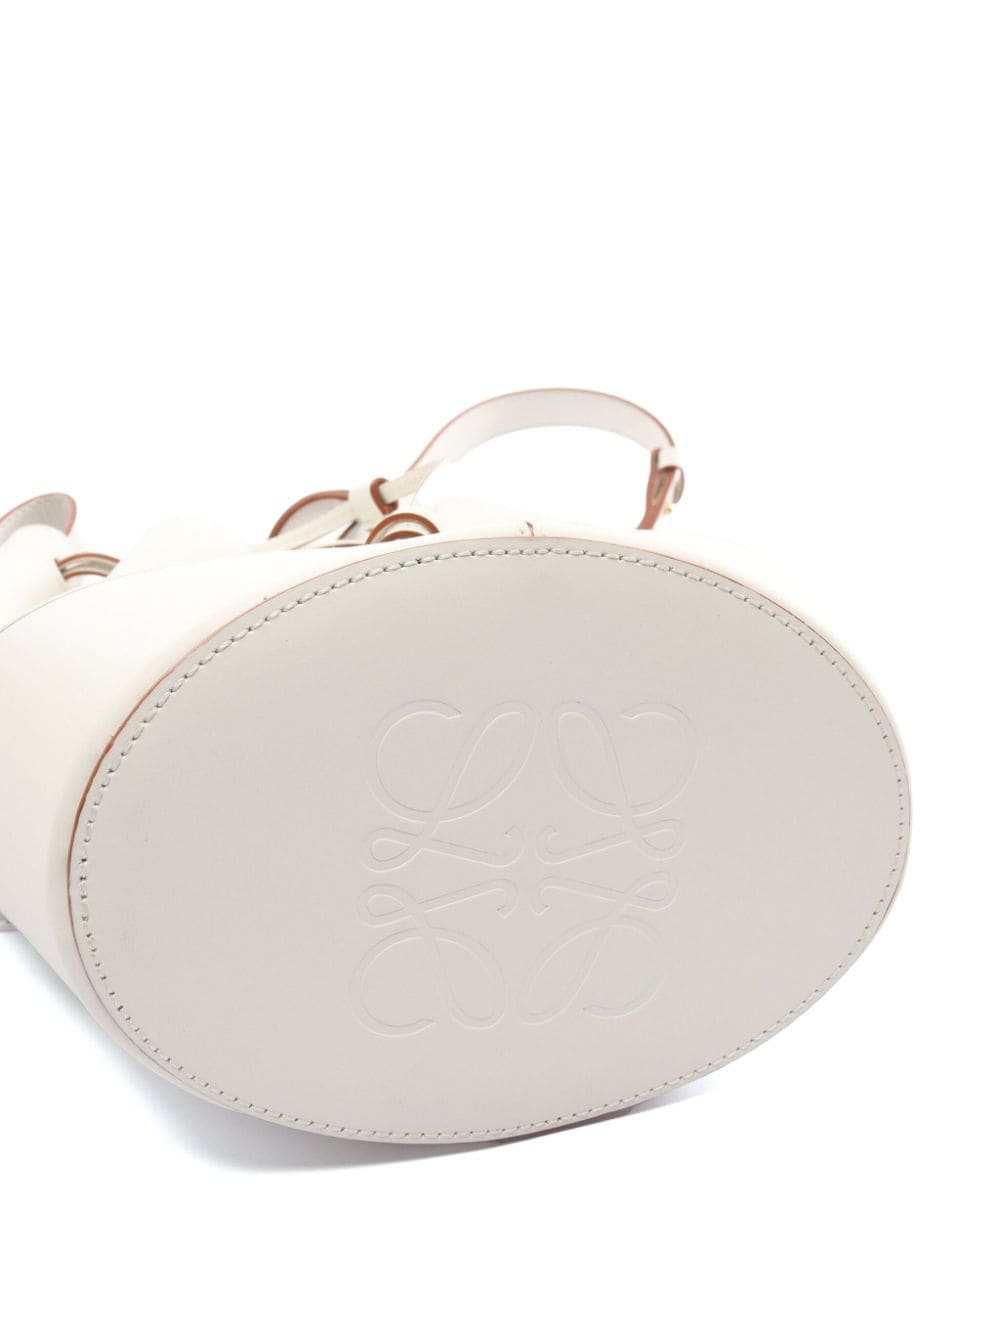 Pre-owned Loewe 2010s Small Balloon Bucket Bag In White